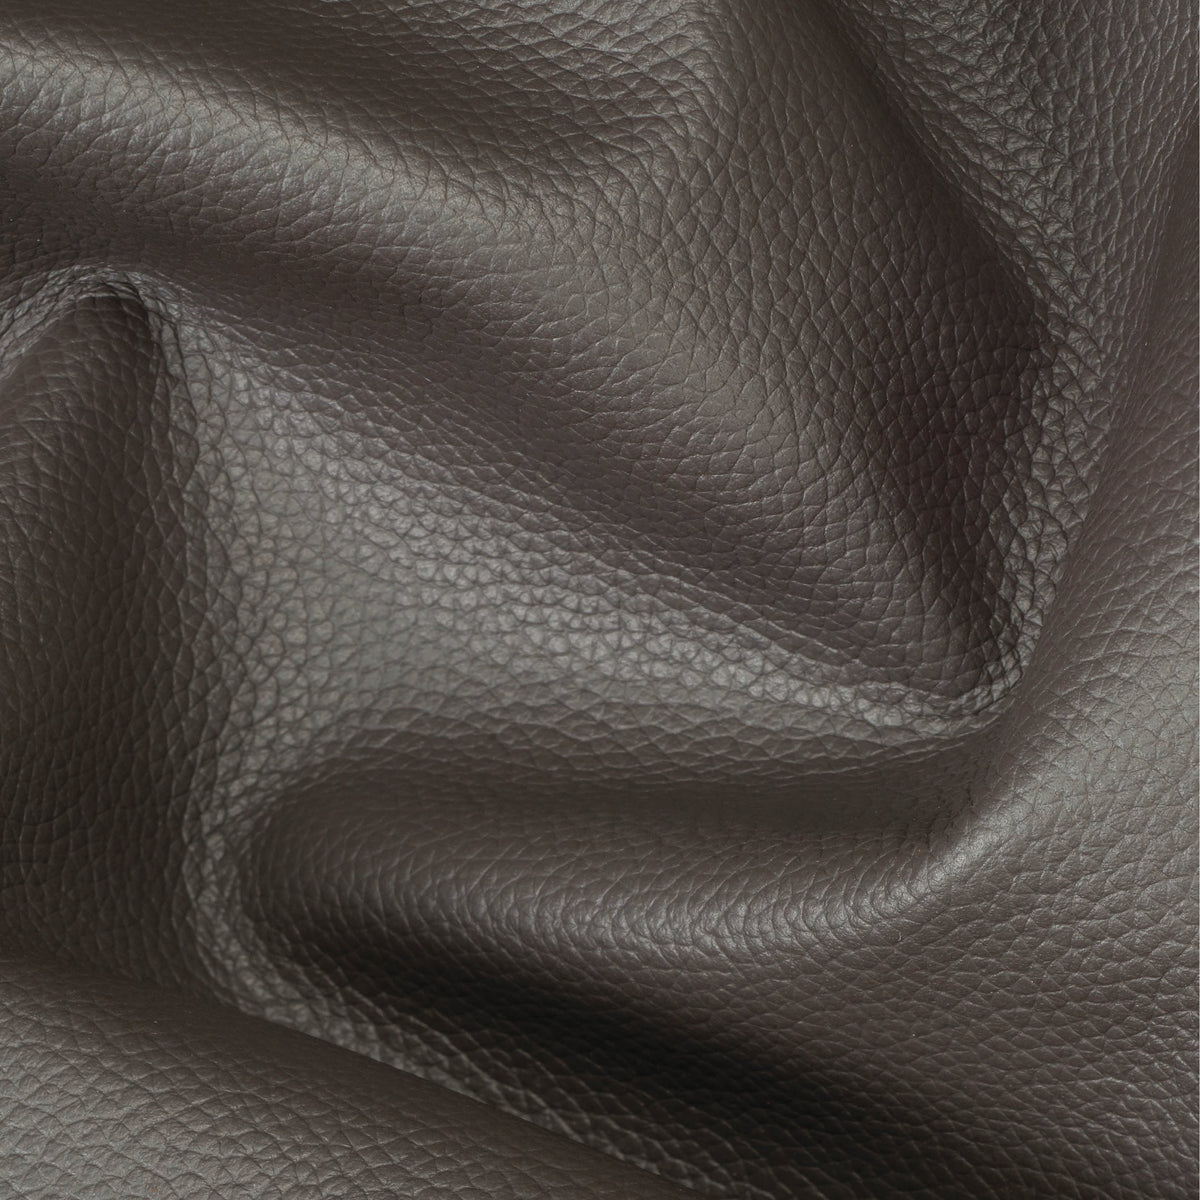 Upholstery Leather: What is and How to Choose? - BuyLeatherOnline